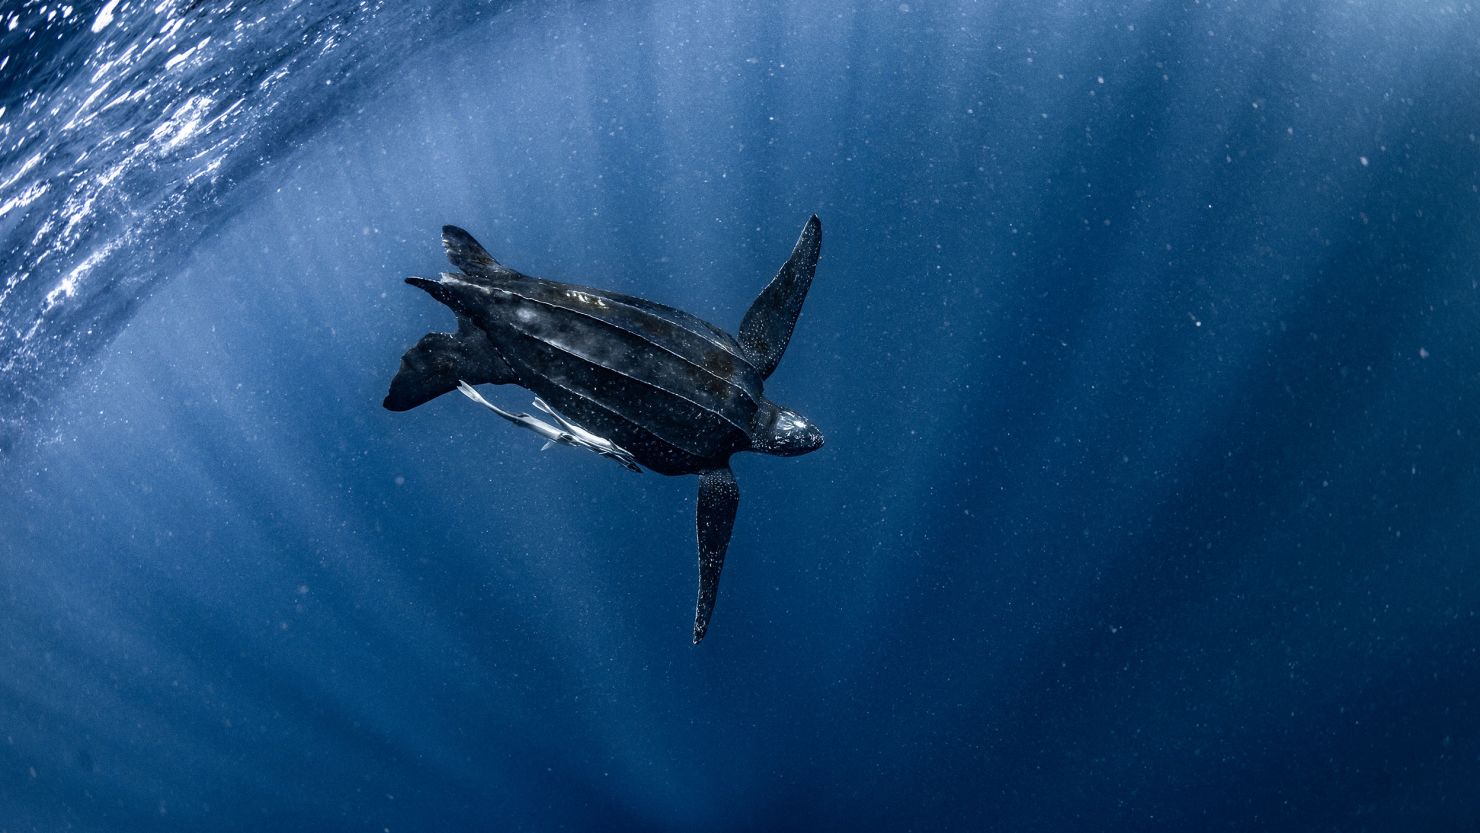 Leatherback turtles encounter many threats during their long migration journeys, and now face extinction due to human activity, a UN report shows.